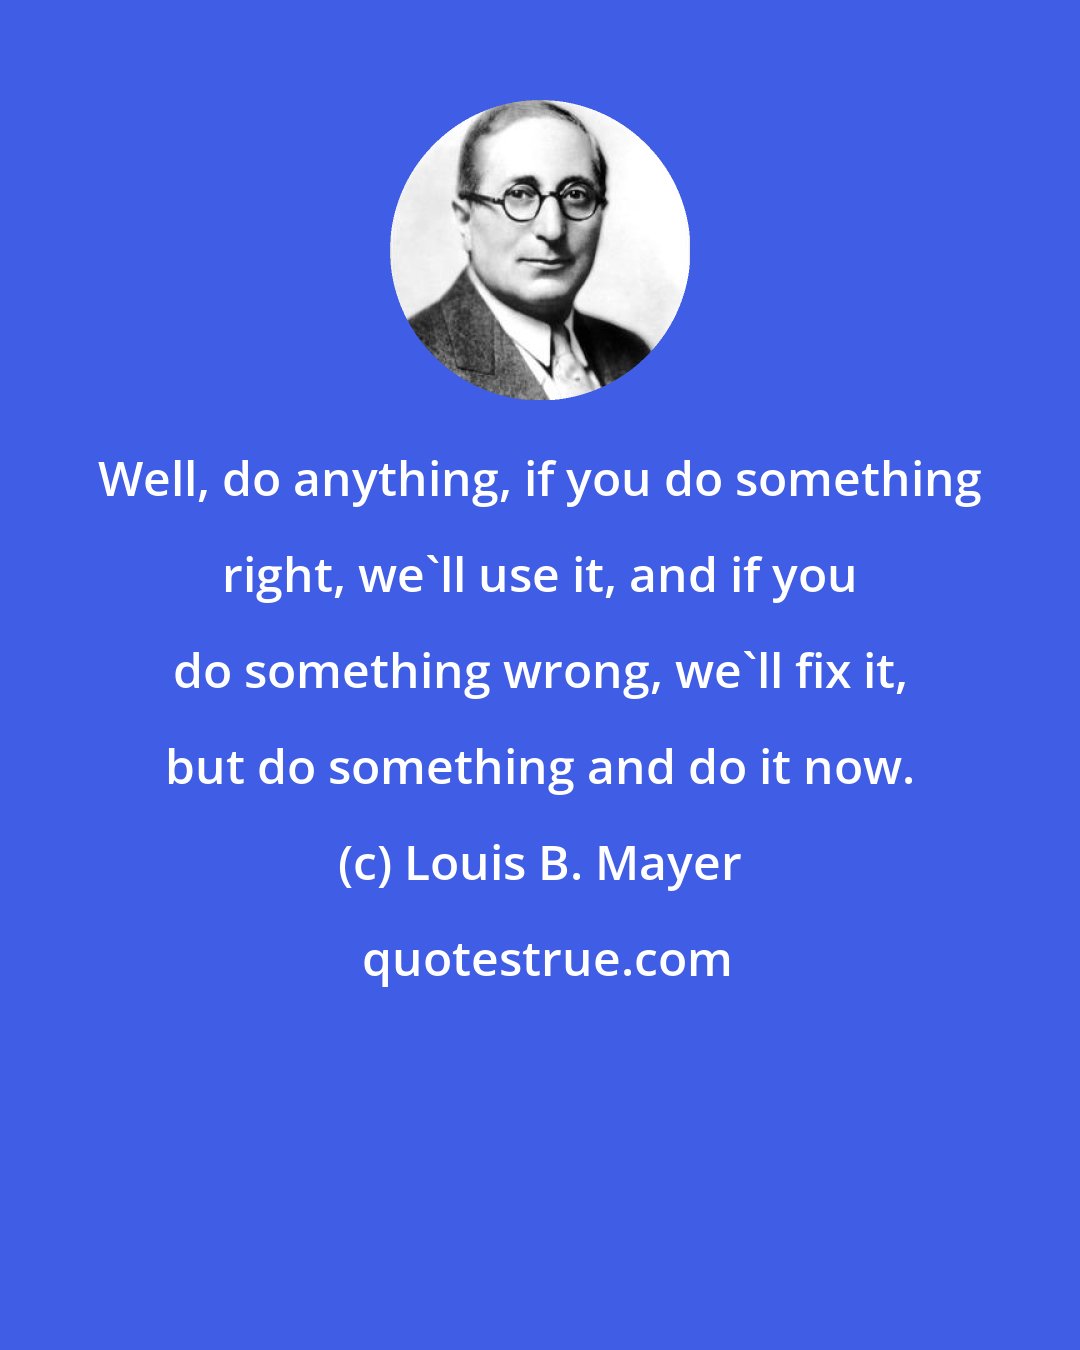 Louis B. Mayer: Well, do anything, if you do something right, we'll use it, and if you do something wrong, we'll fix it, but do something and do it now.